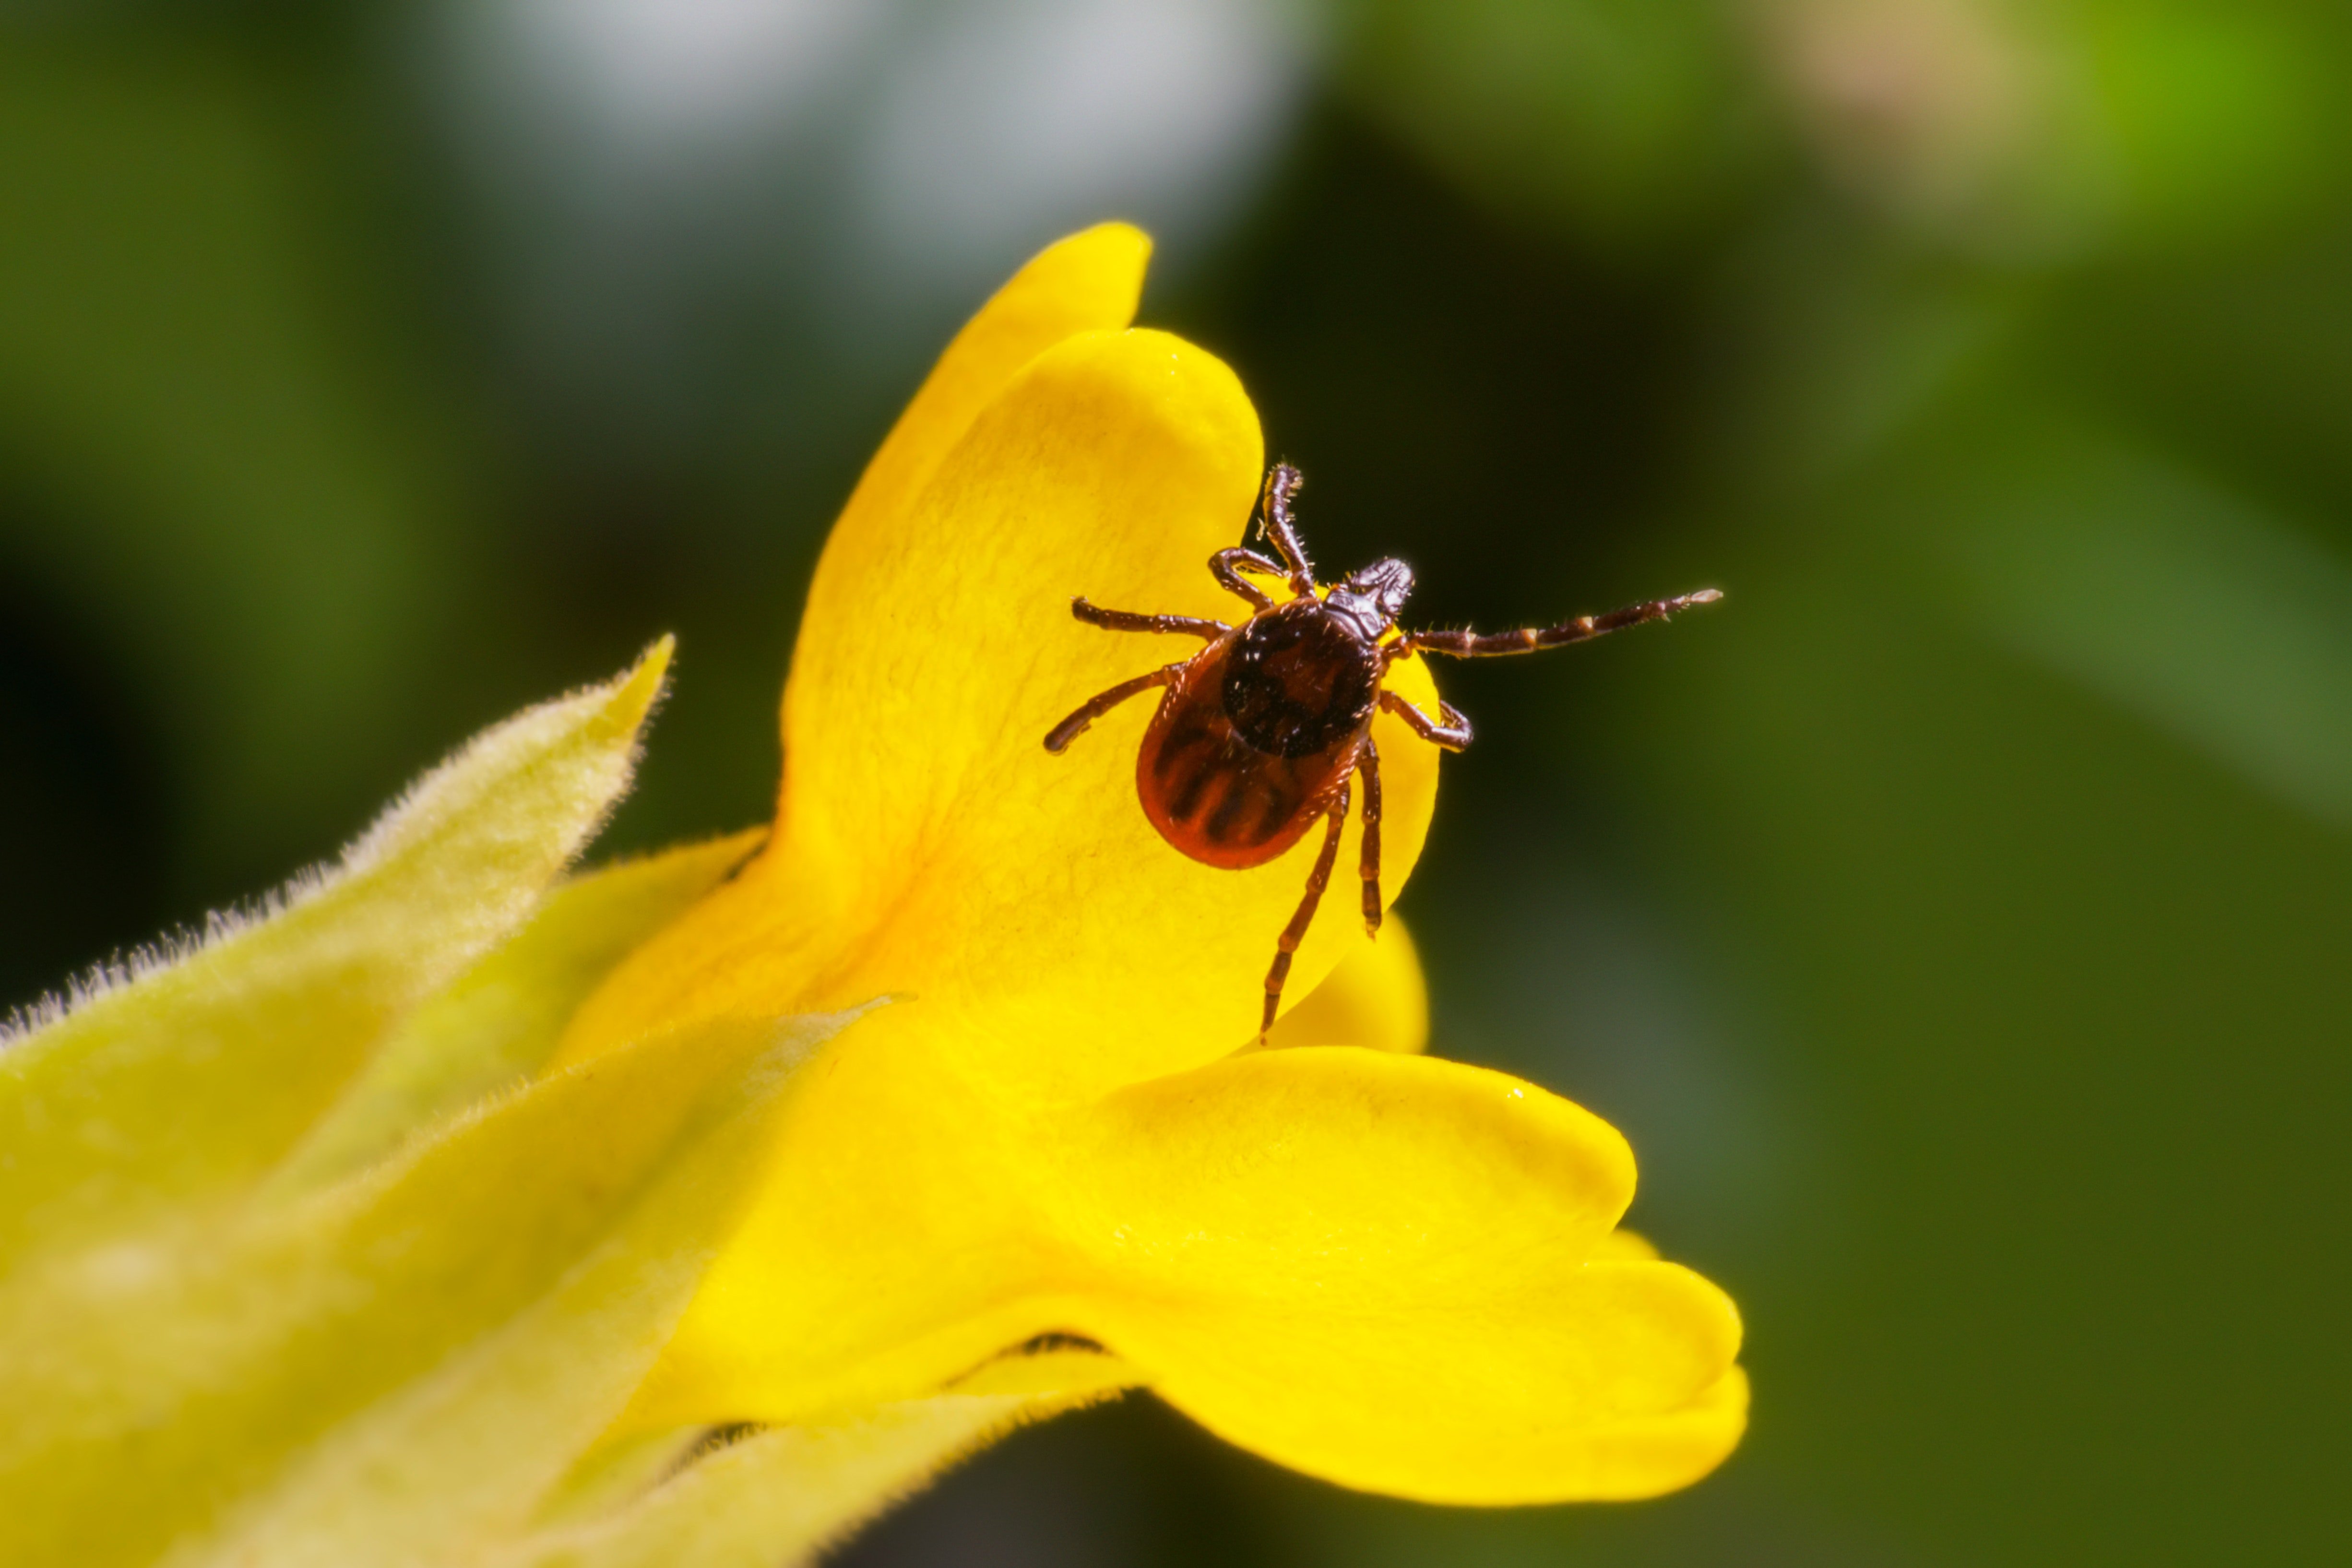 Pictured - A macro photography of insect in yellow flower | Source: Pexels 